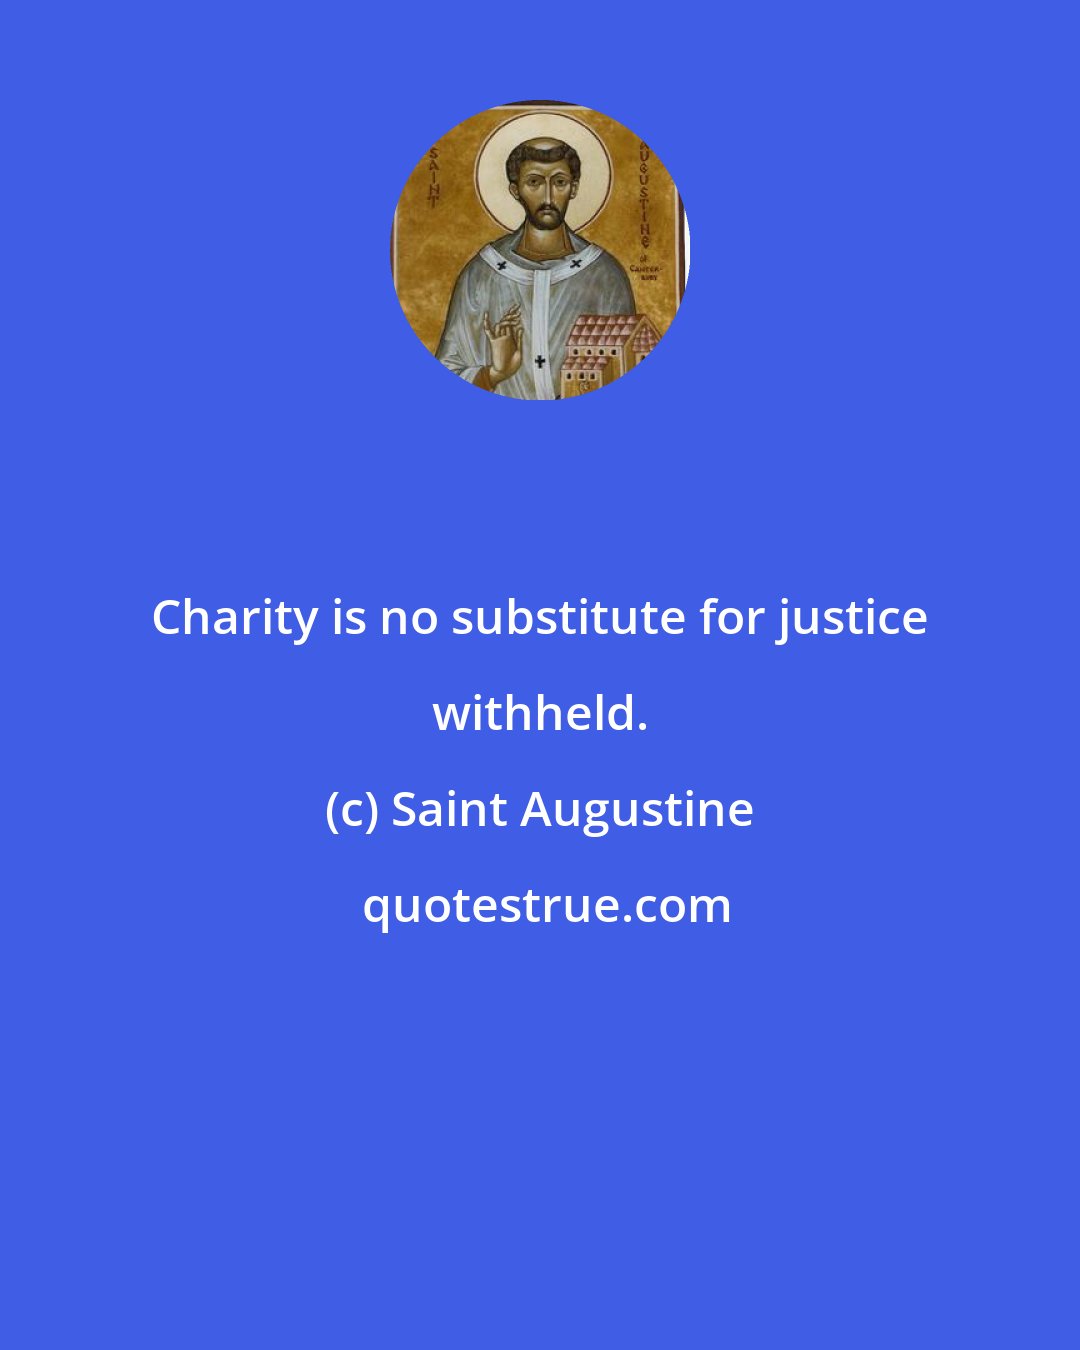 Saint Augustine: Charity is no substitute for justice withheld.